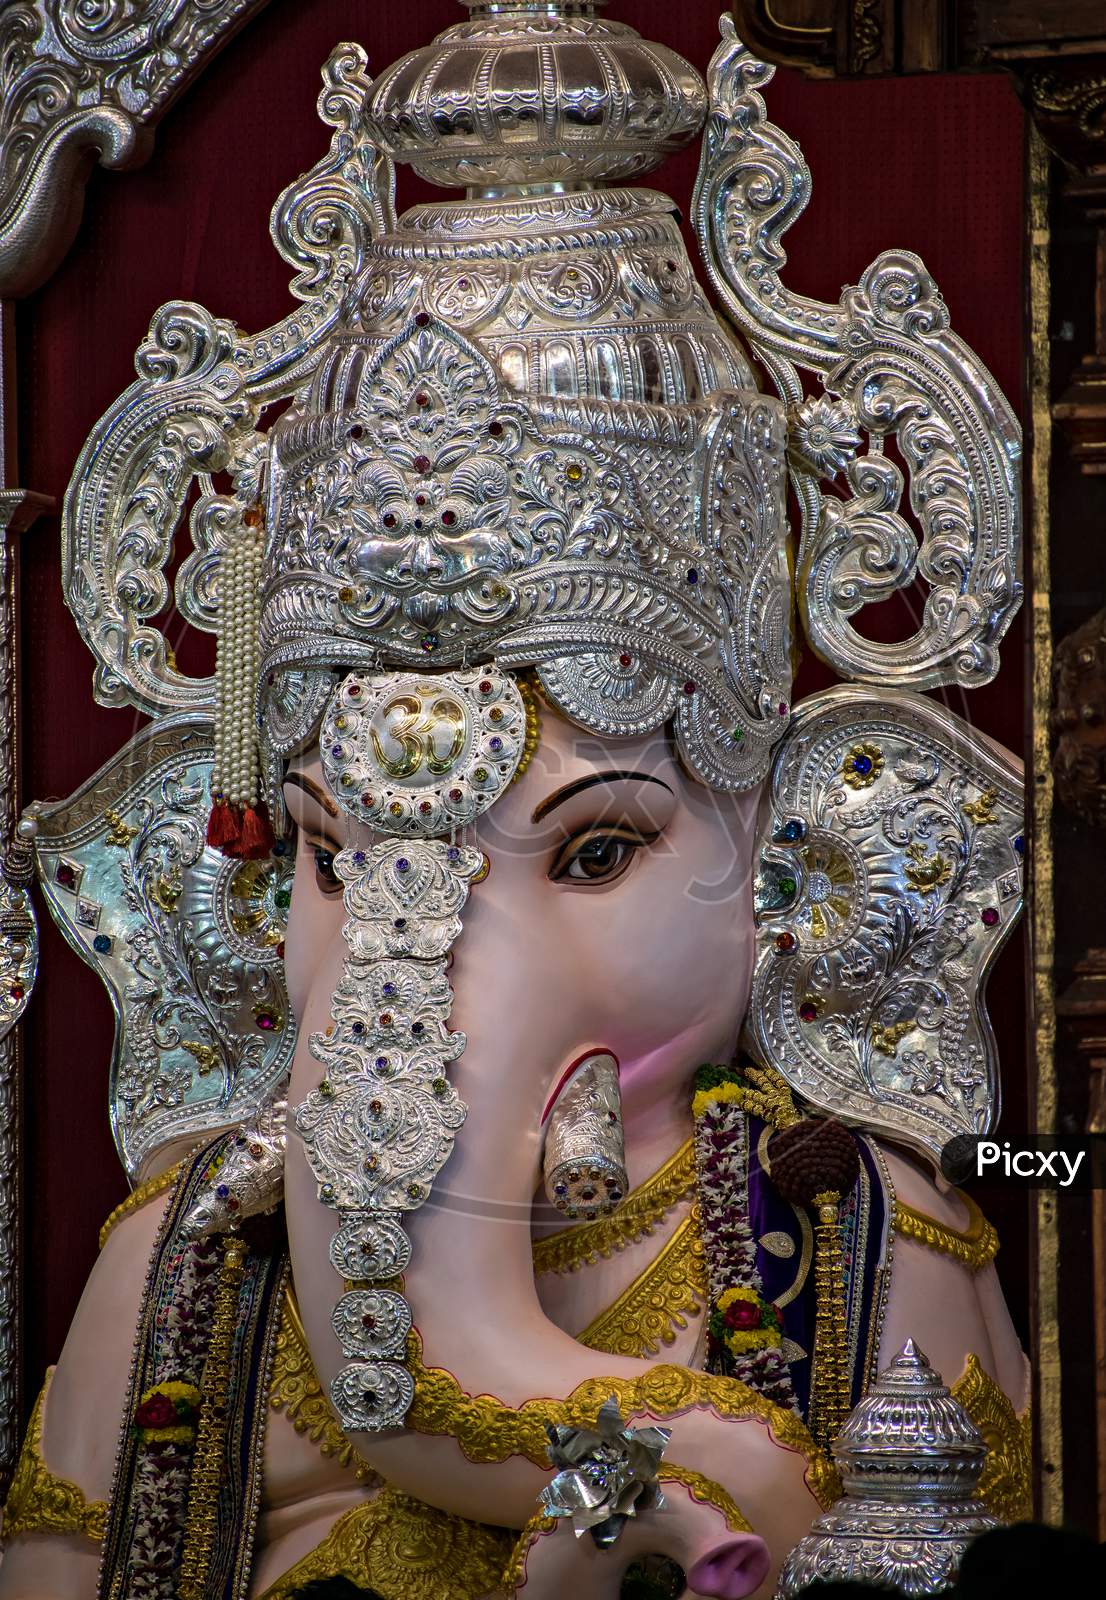 Close Up Portrait View Of Decorated And Garlanded Idol Of Hindu God Ganesha.